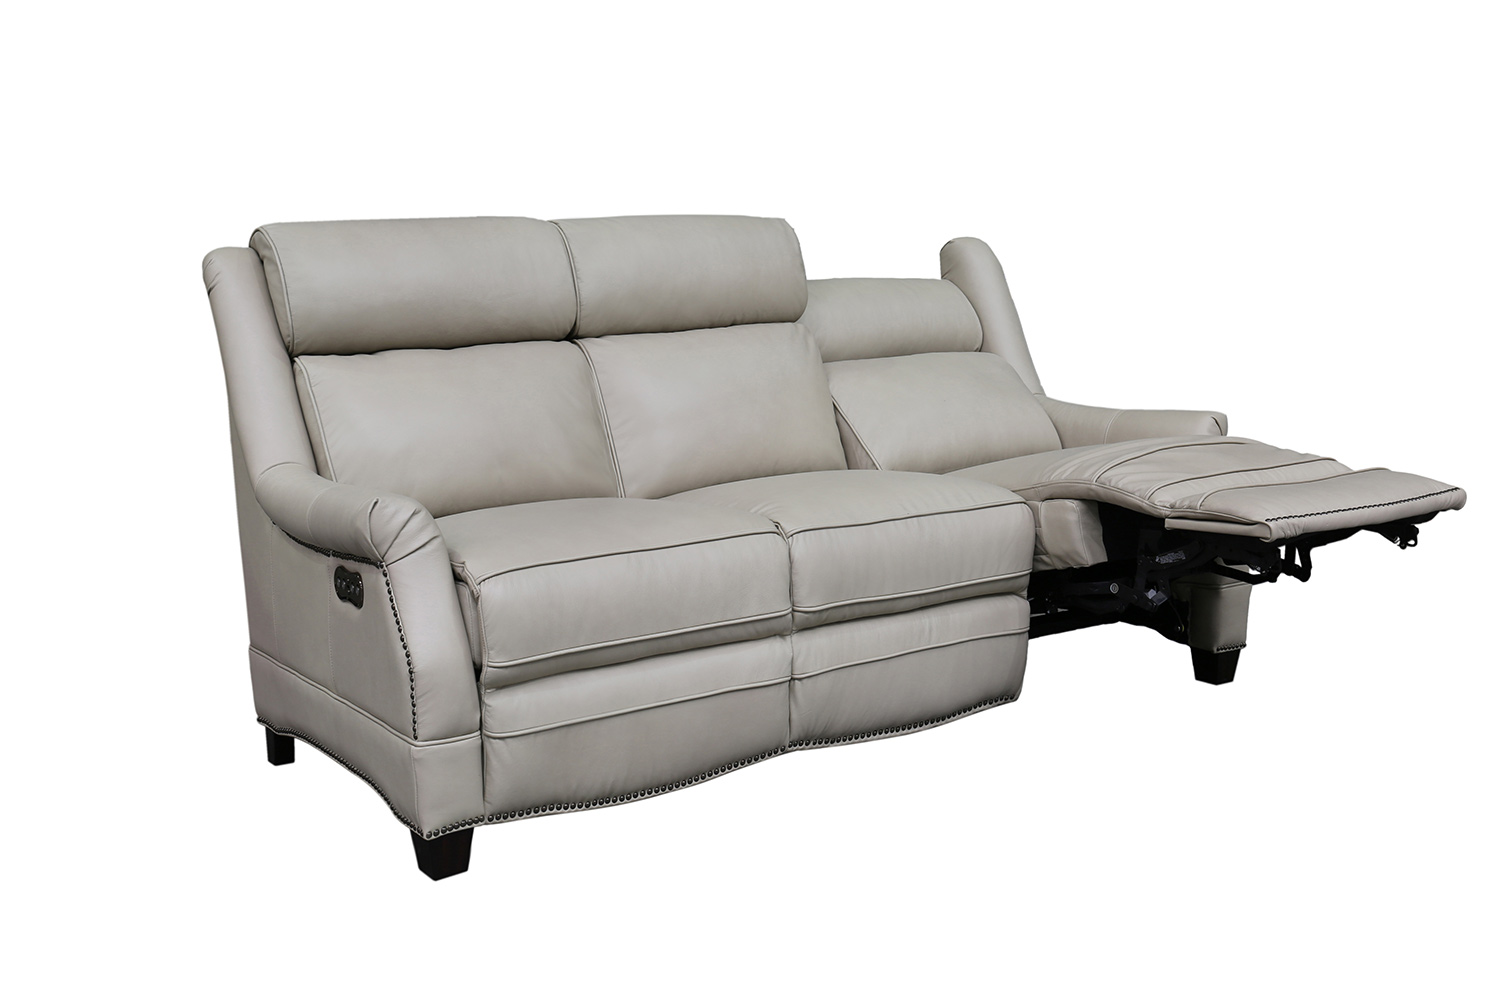 Barcalounger Warrendale Power Reclining Sofa with Power Head Rests - Shoreham Cream/All Leather